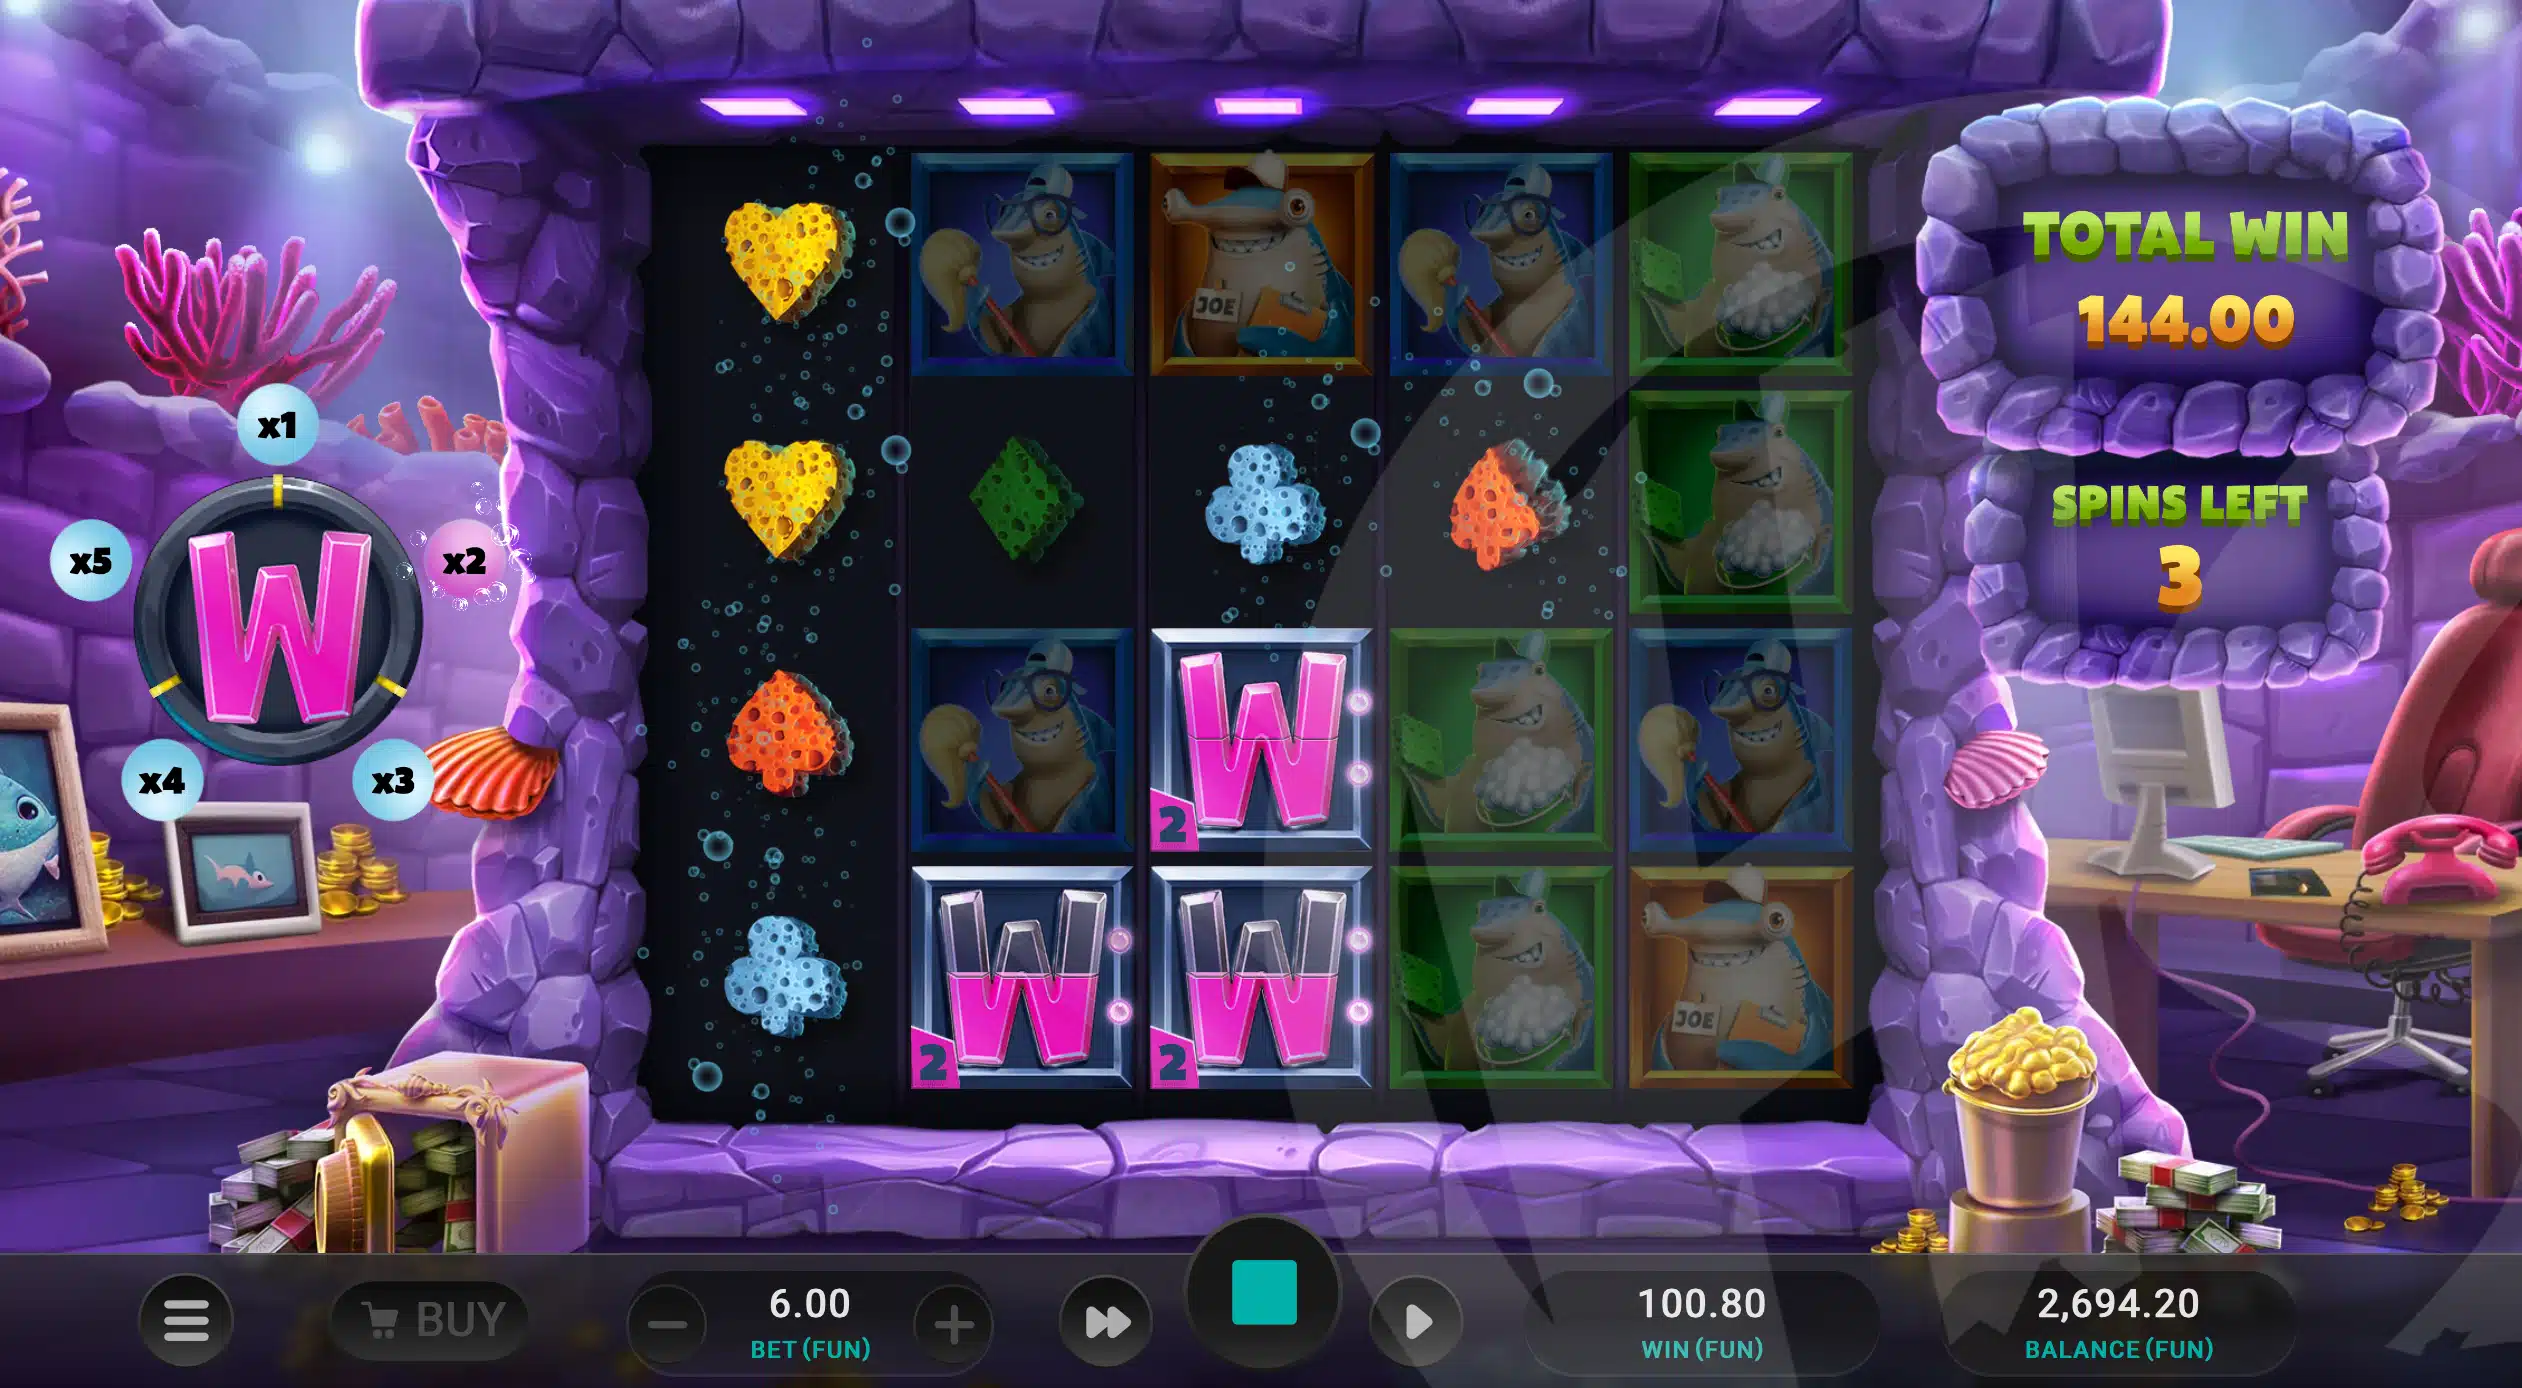 The Countdown Wild Feature and Associated Multiplier is Persistent During Free Spins